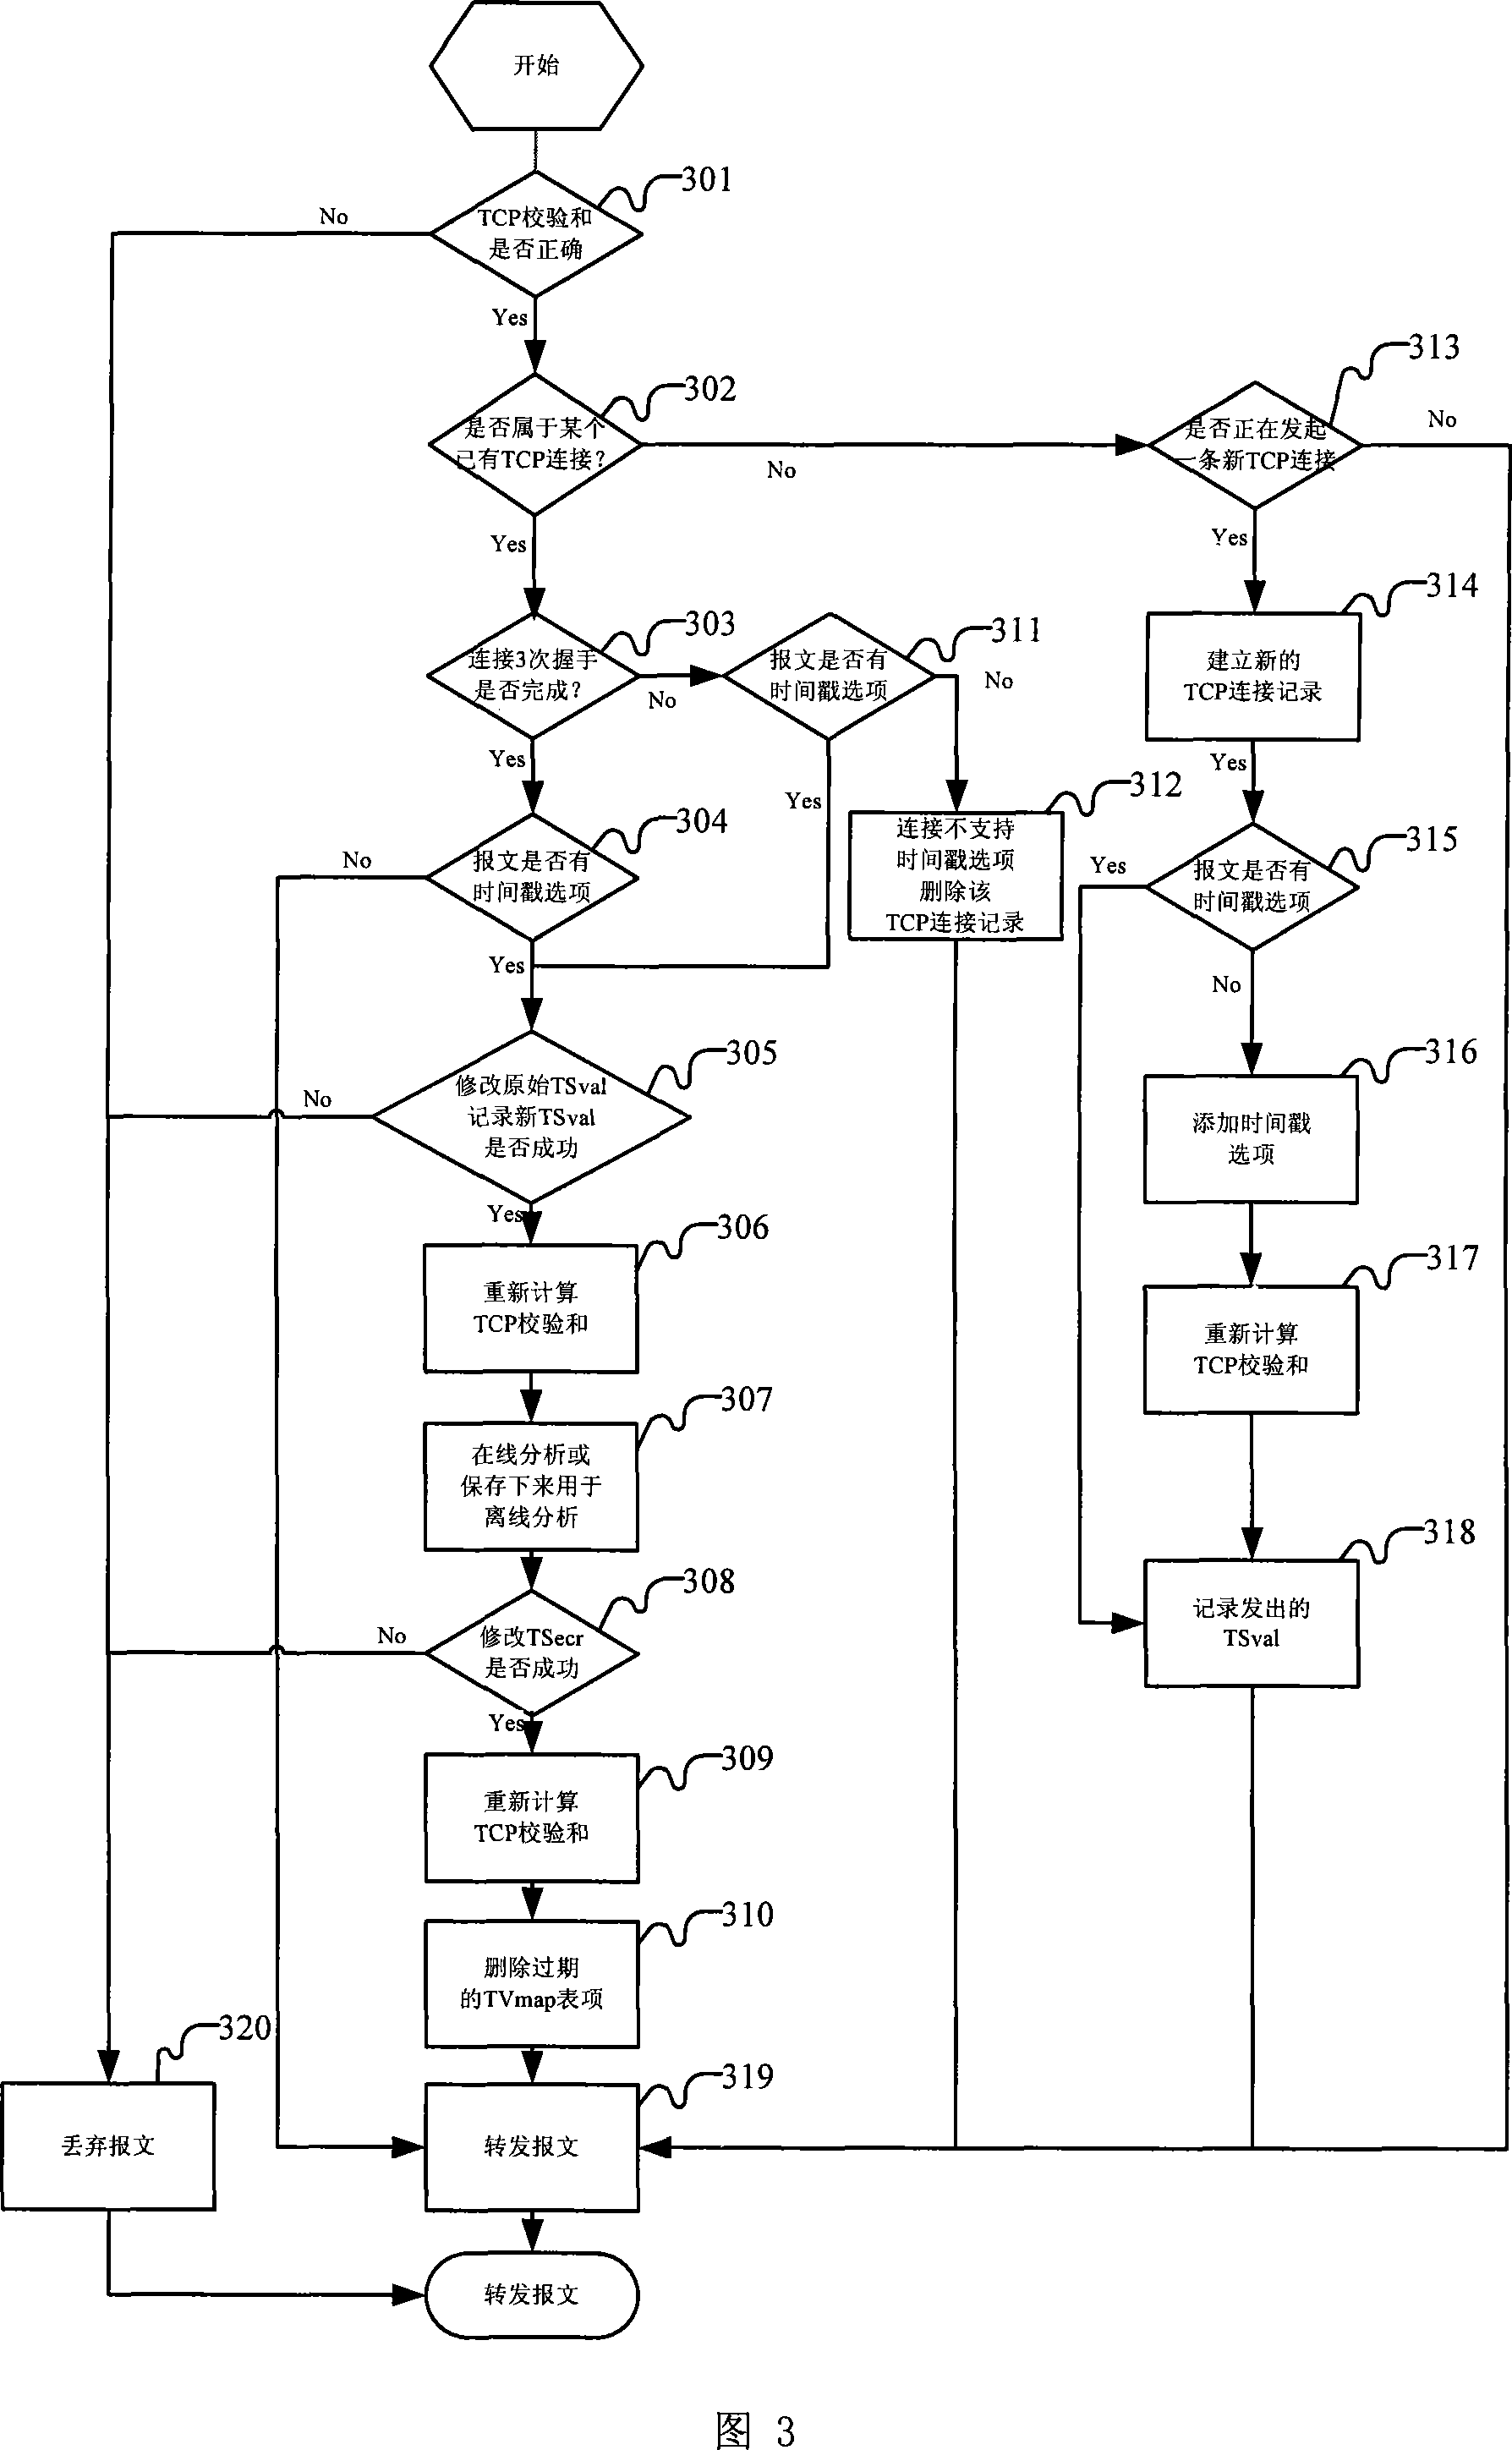 A determination method of the initiation relationship within TCP messages based on TCP timestamp options